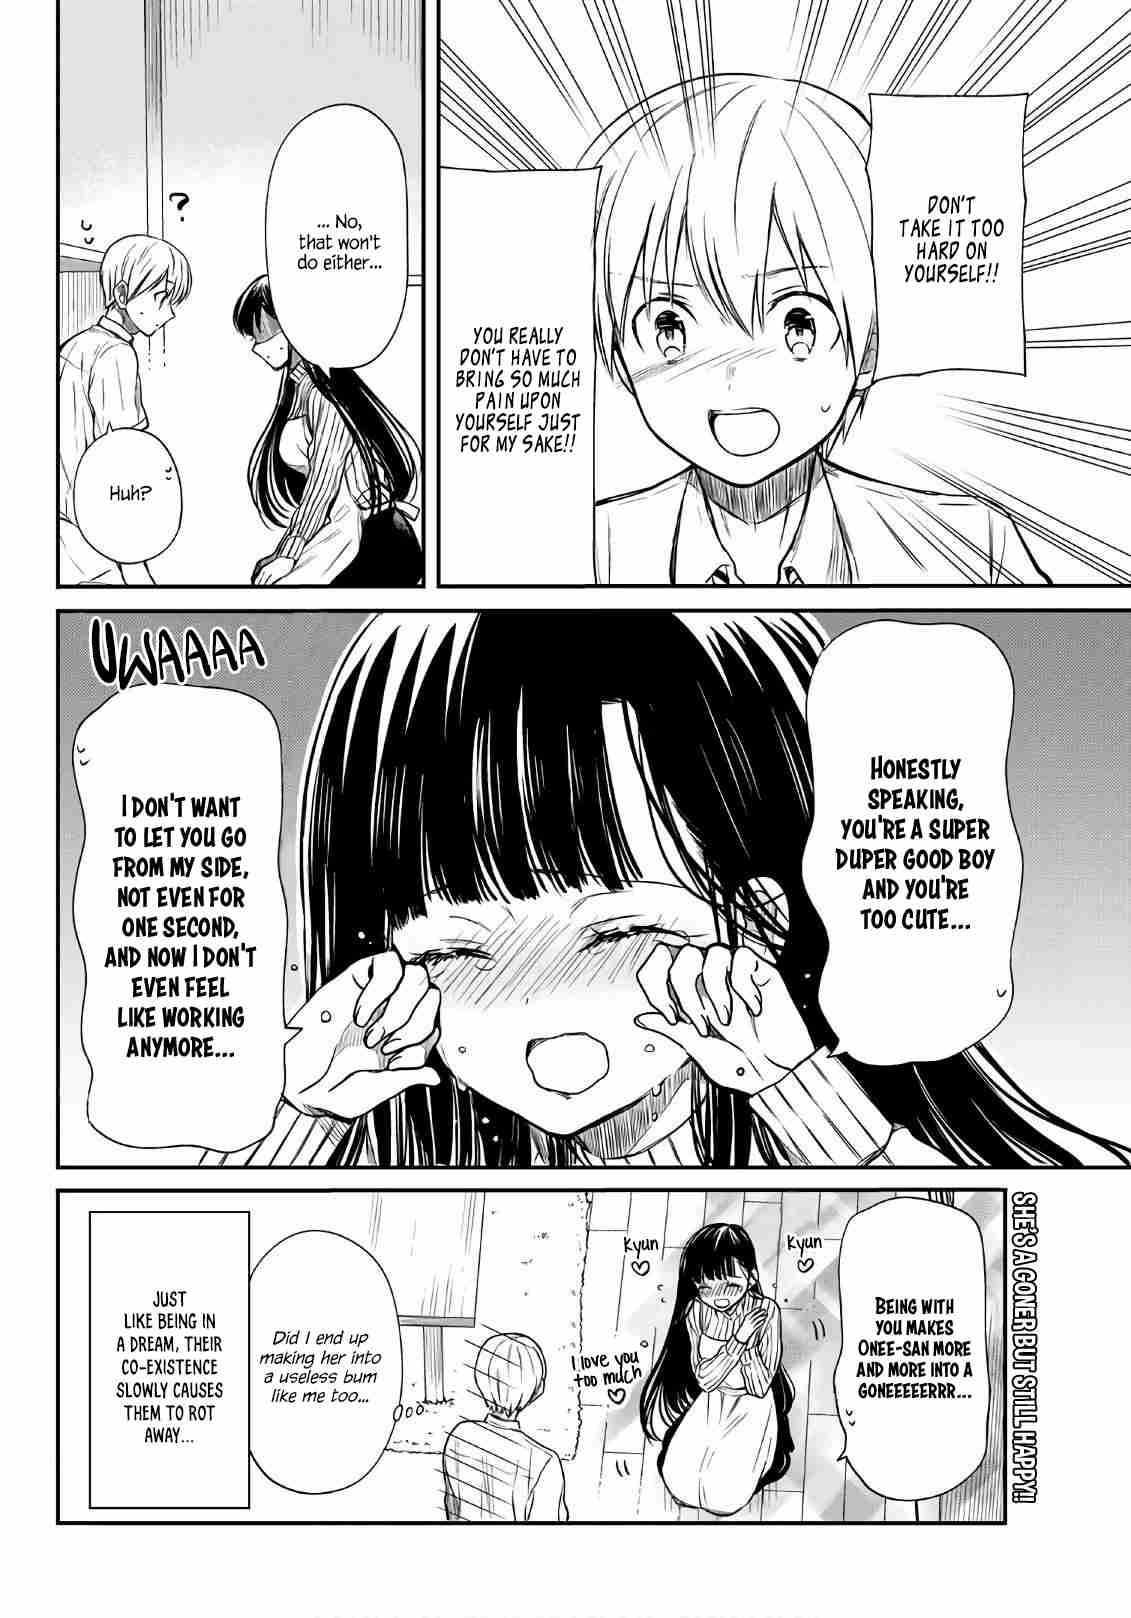 The Story of an Onee San Who Wants to Keep a High School Boy. Ch. 34